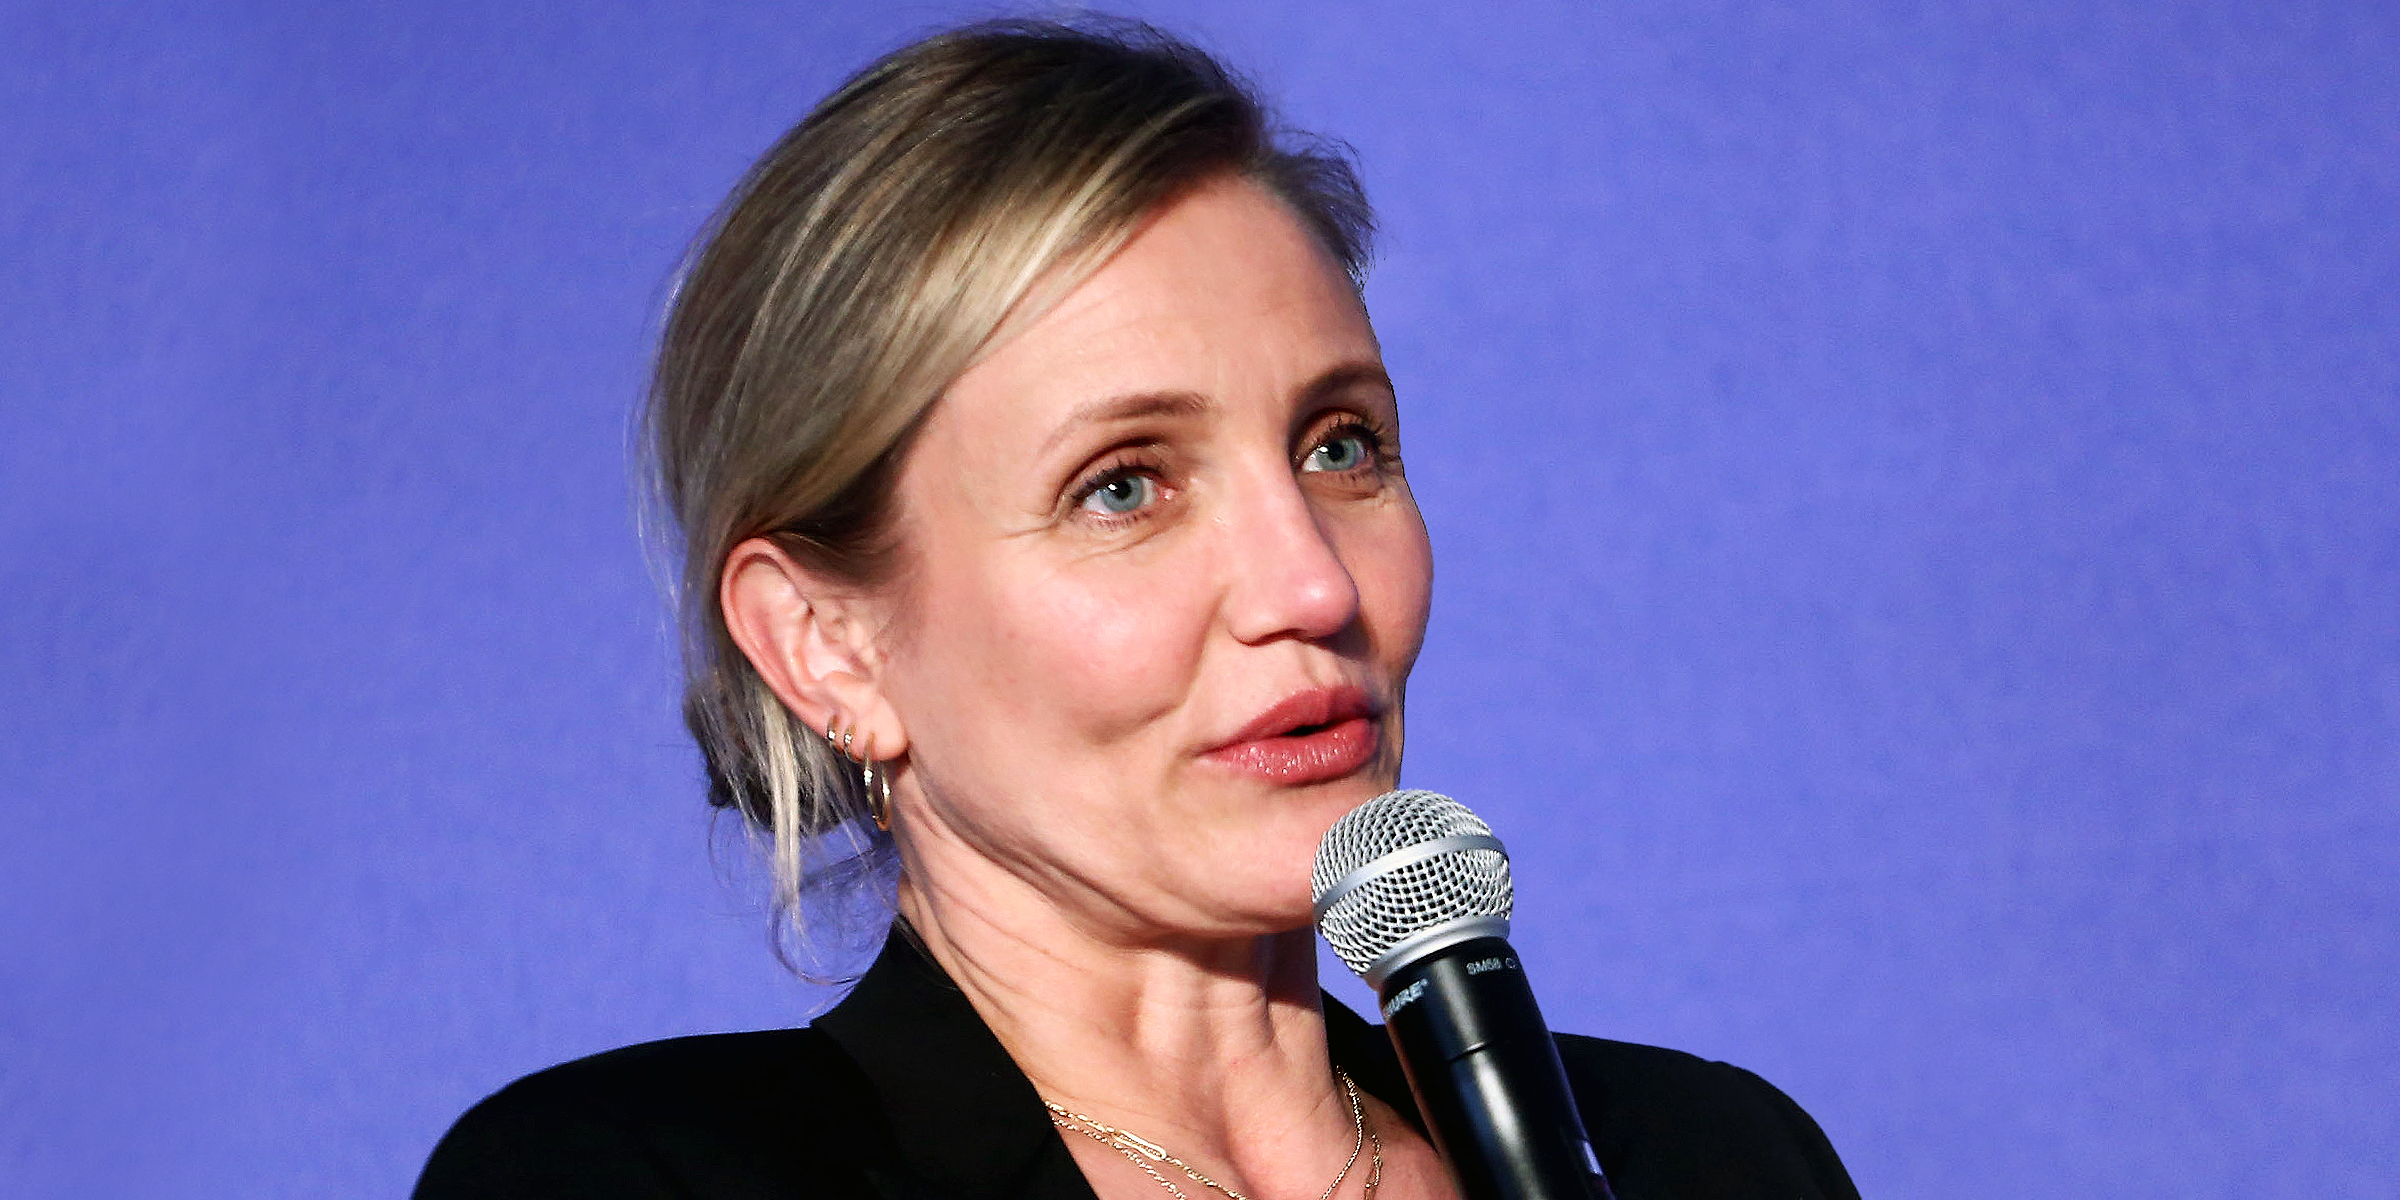 Cameron Diaz | Source: Getty Images